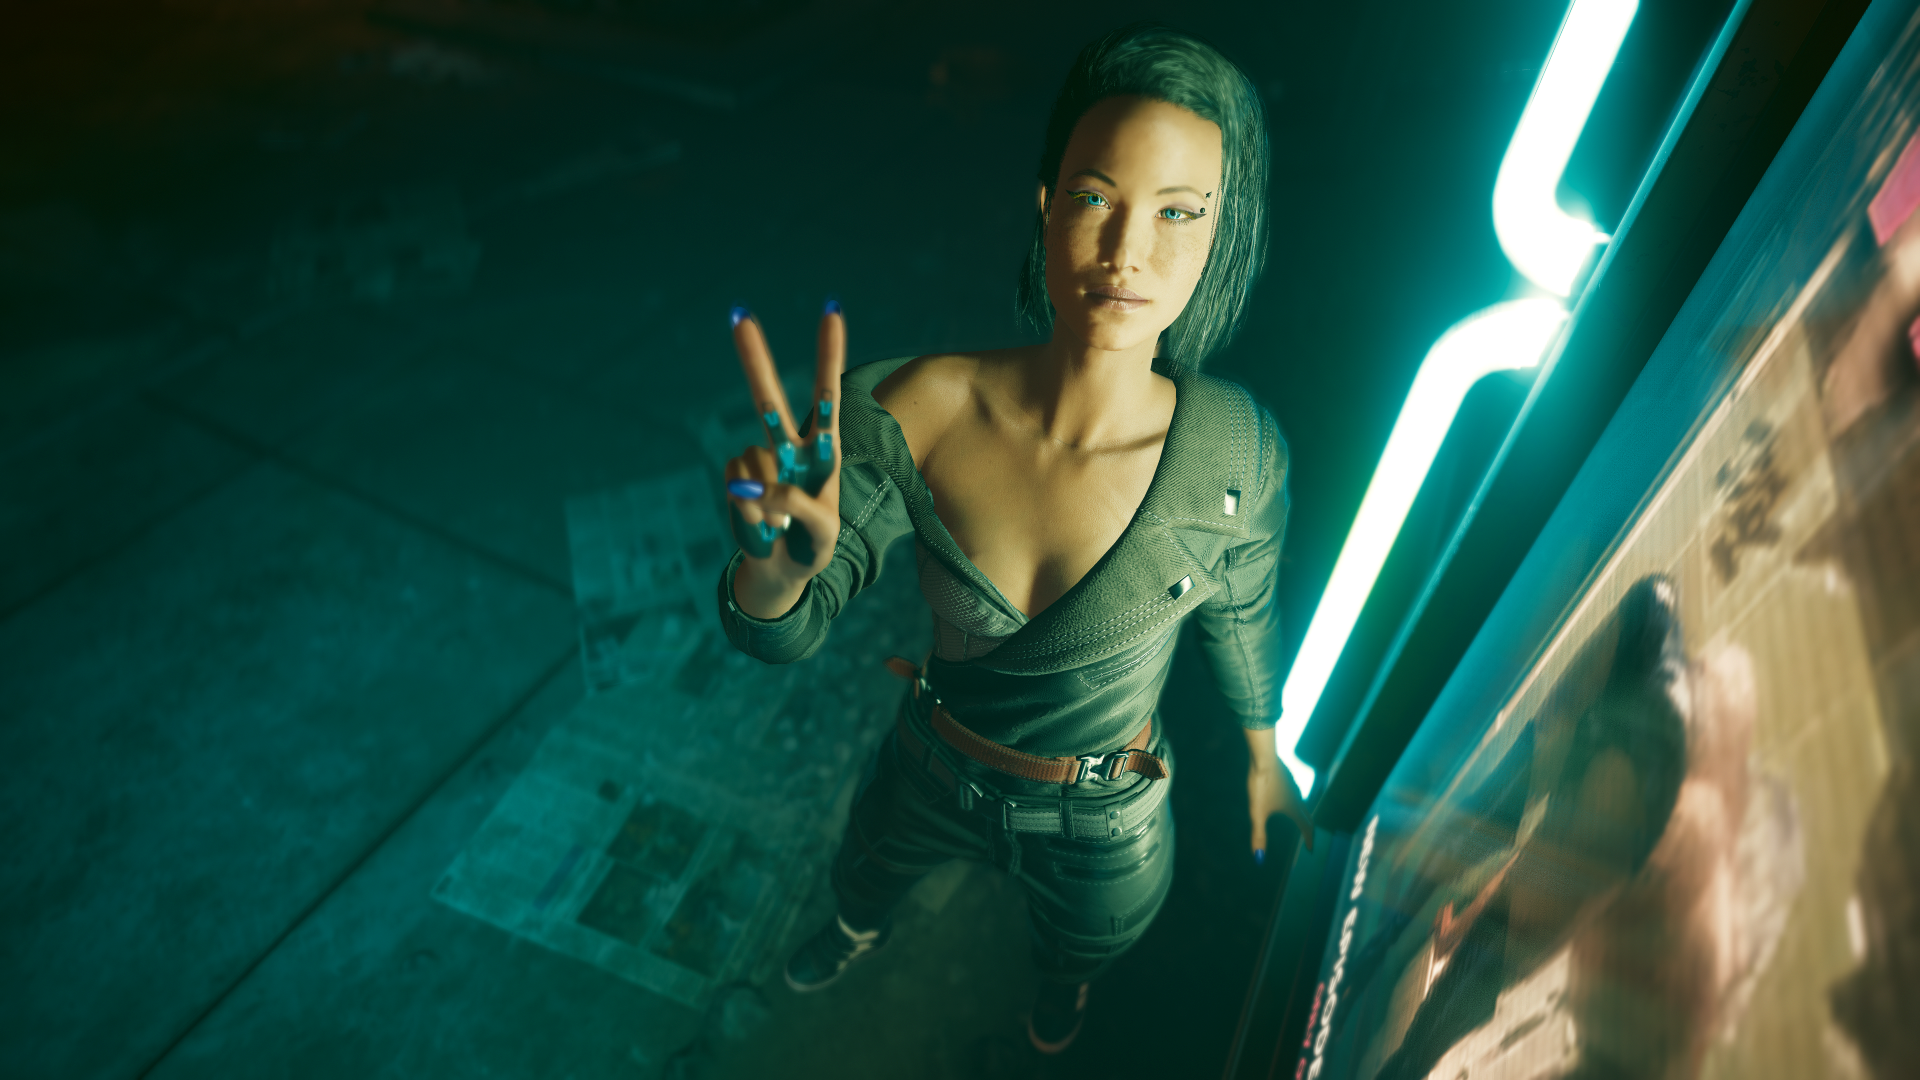 Female Version Neon CD Projekt RED Peace Sign Cyberpunk 2077 CGi Video Game Characters Video Game Ar 1920x1080